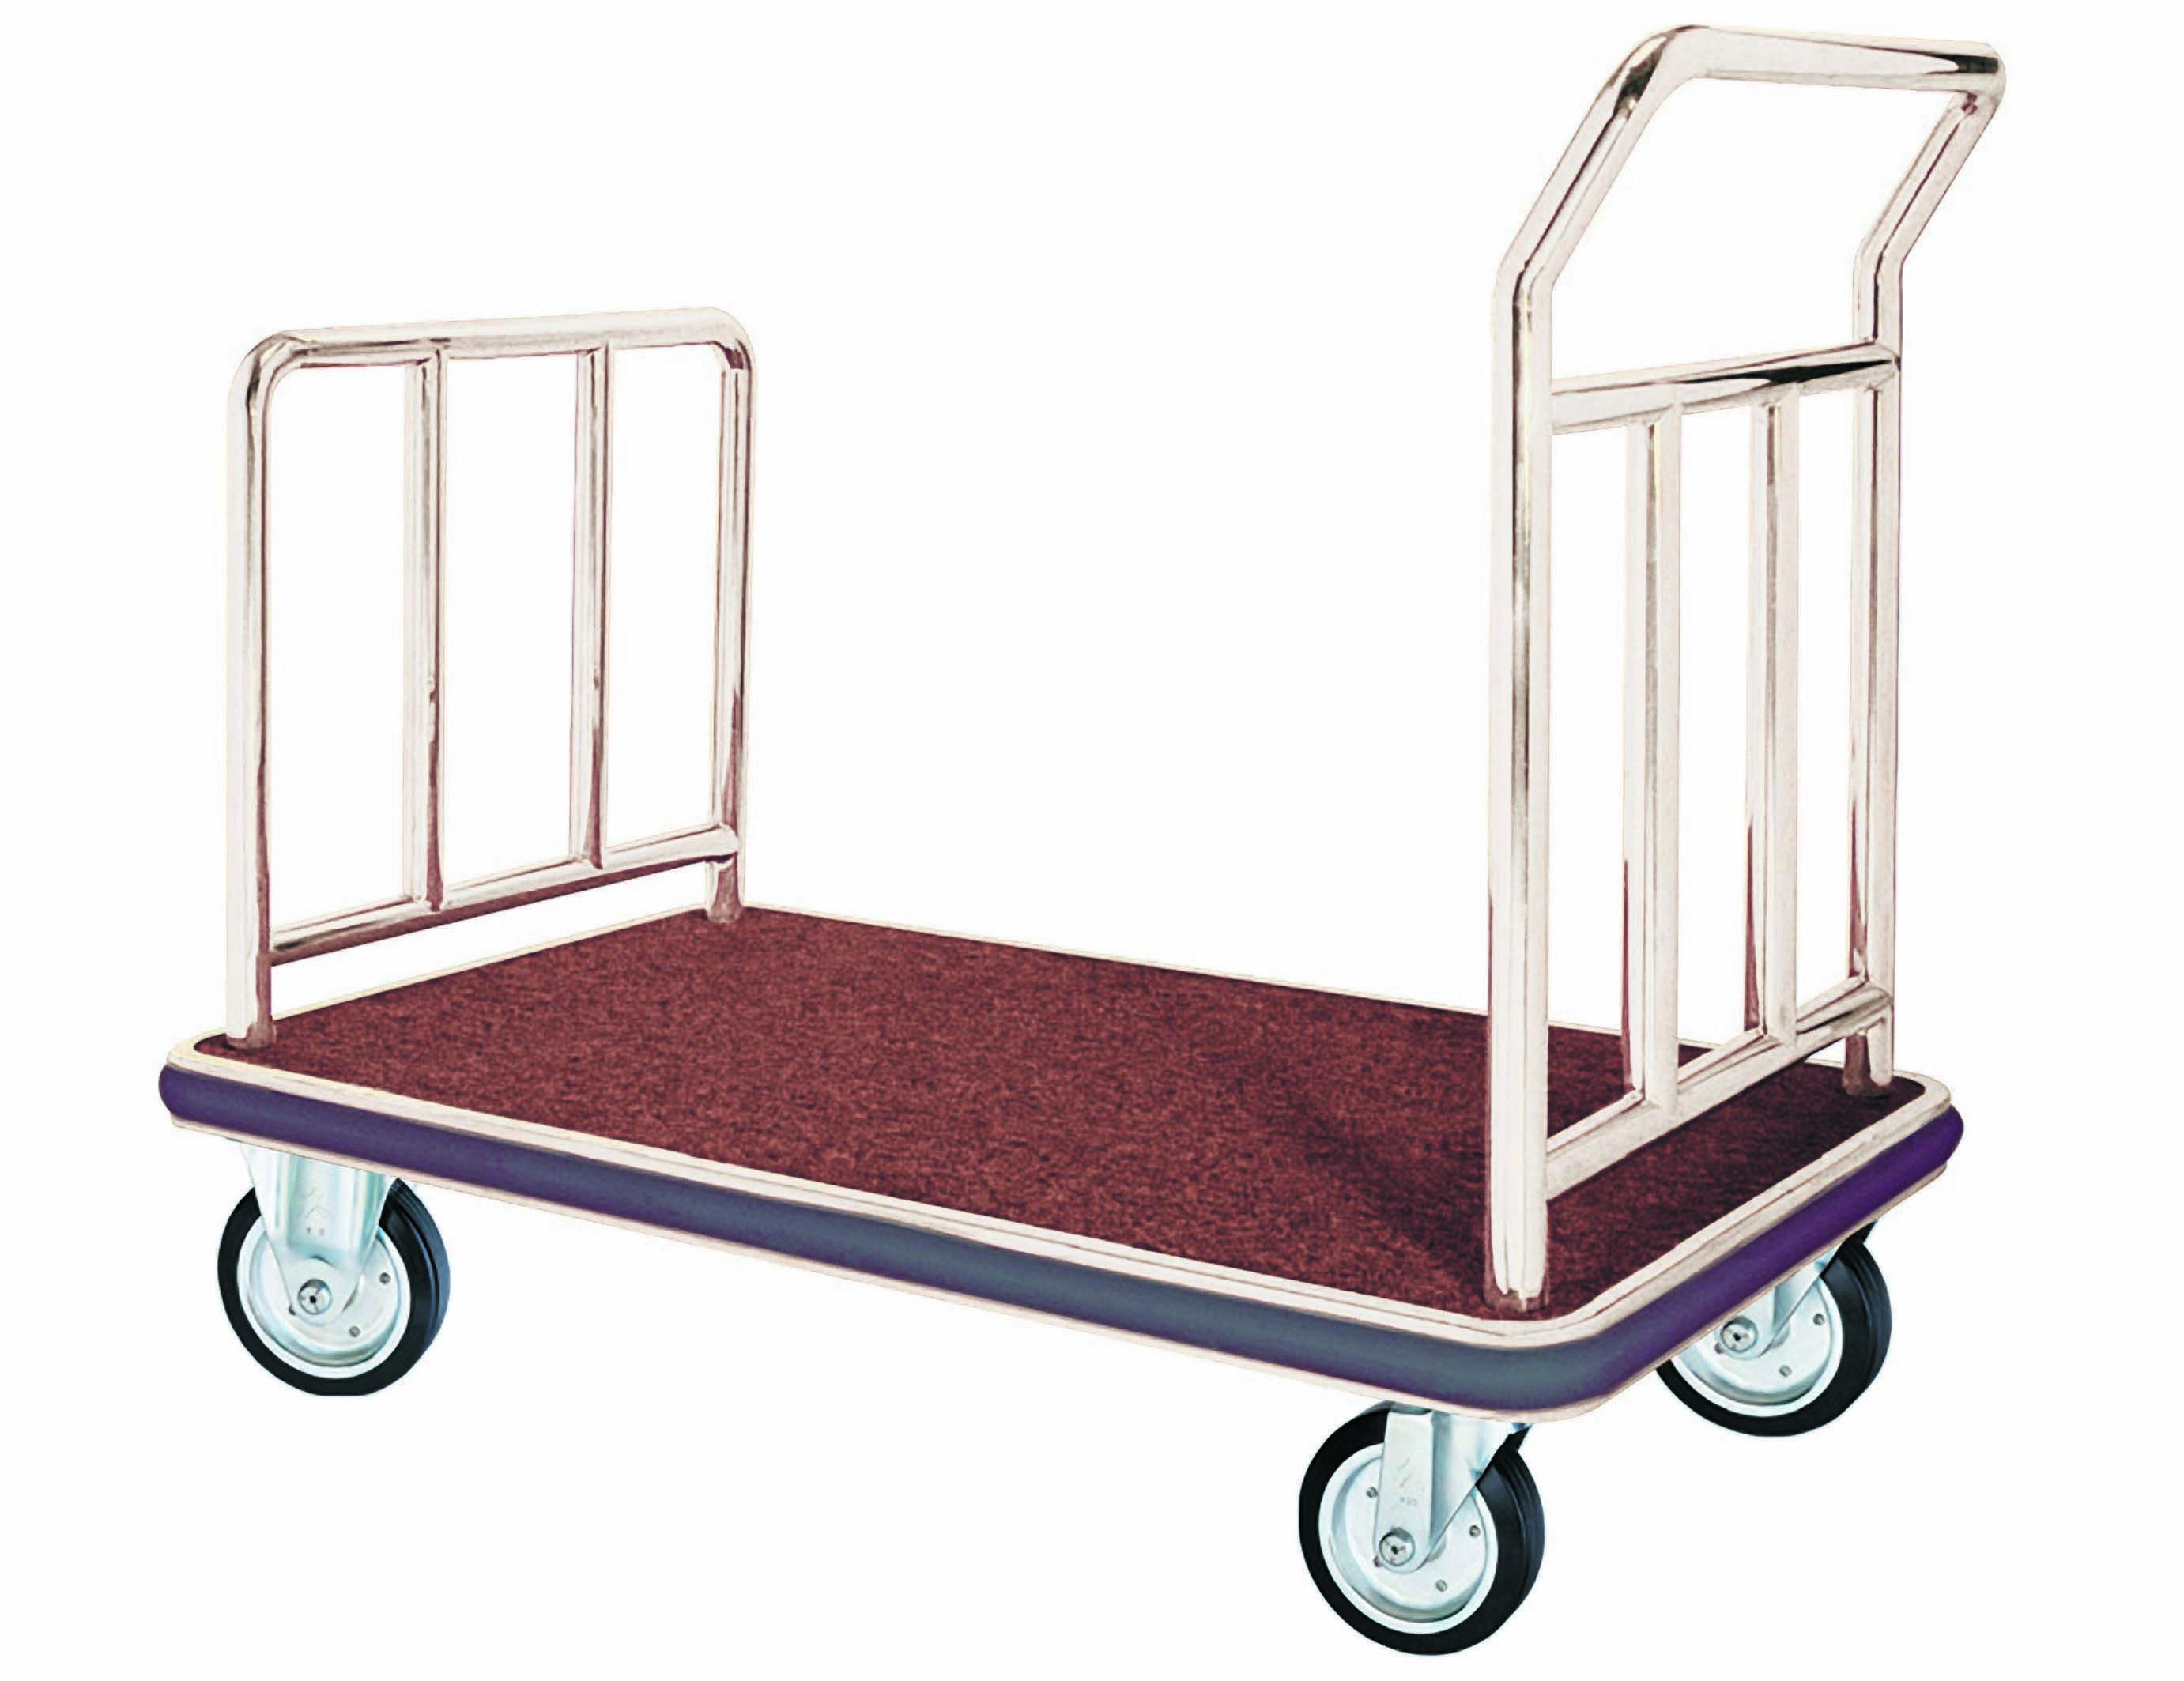 Aarco Products FB-1C Bellman's Hand Truck Luggage Cart with Carpeted Bed Chrome Finish